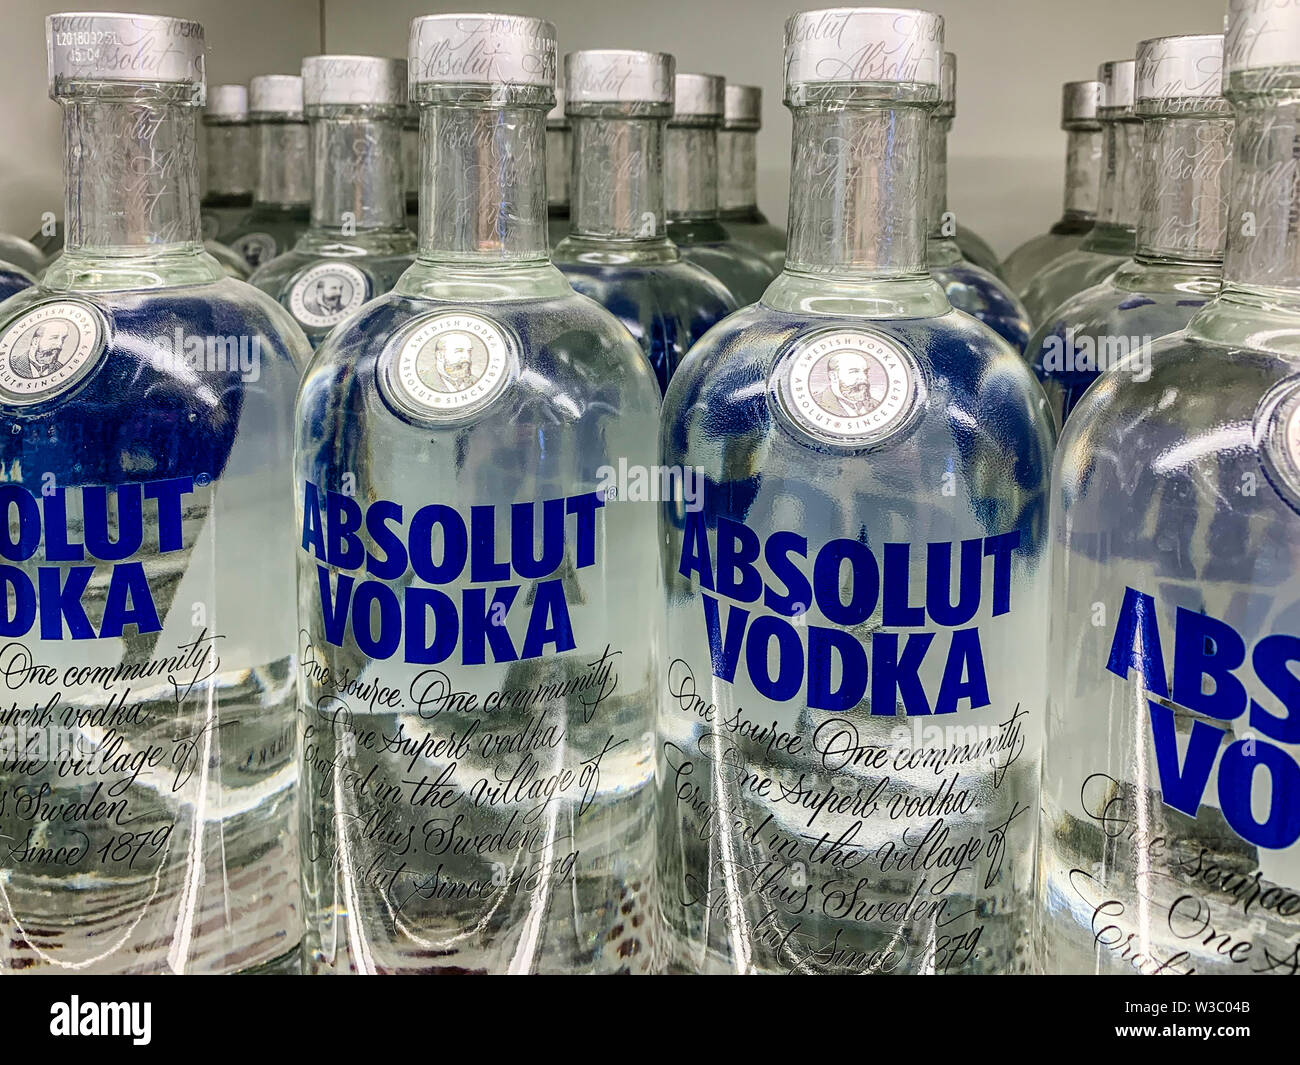 Vodka bottles on a shelf in a store. Absolut Vodka is a famous brand of vodka, produced near Ahus, in southern Sweden, owned by the French group Perno Stock Photo